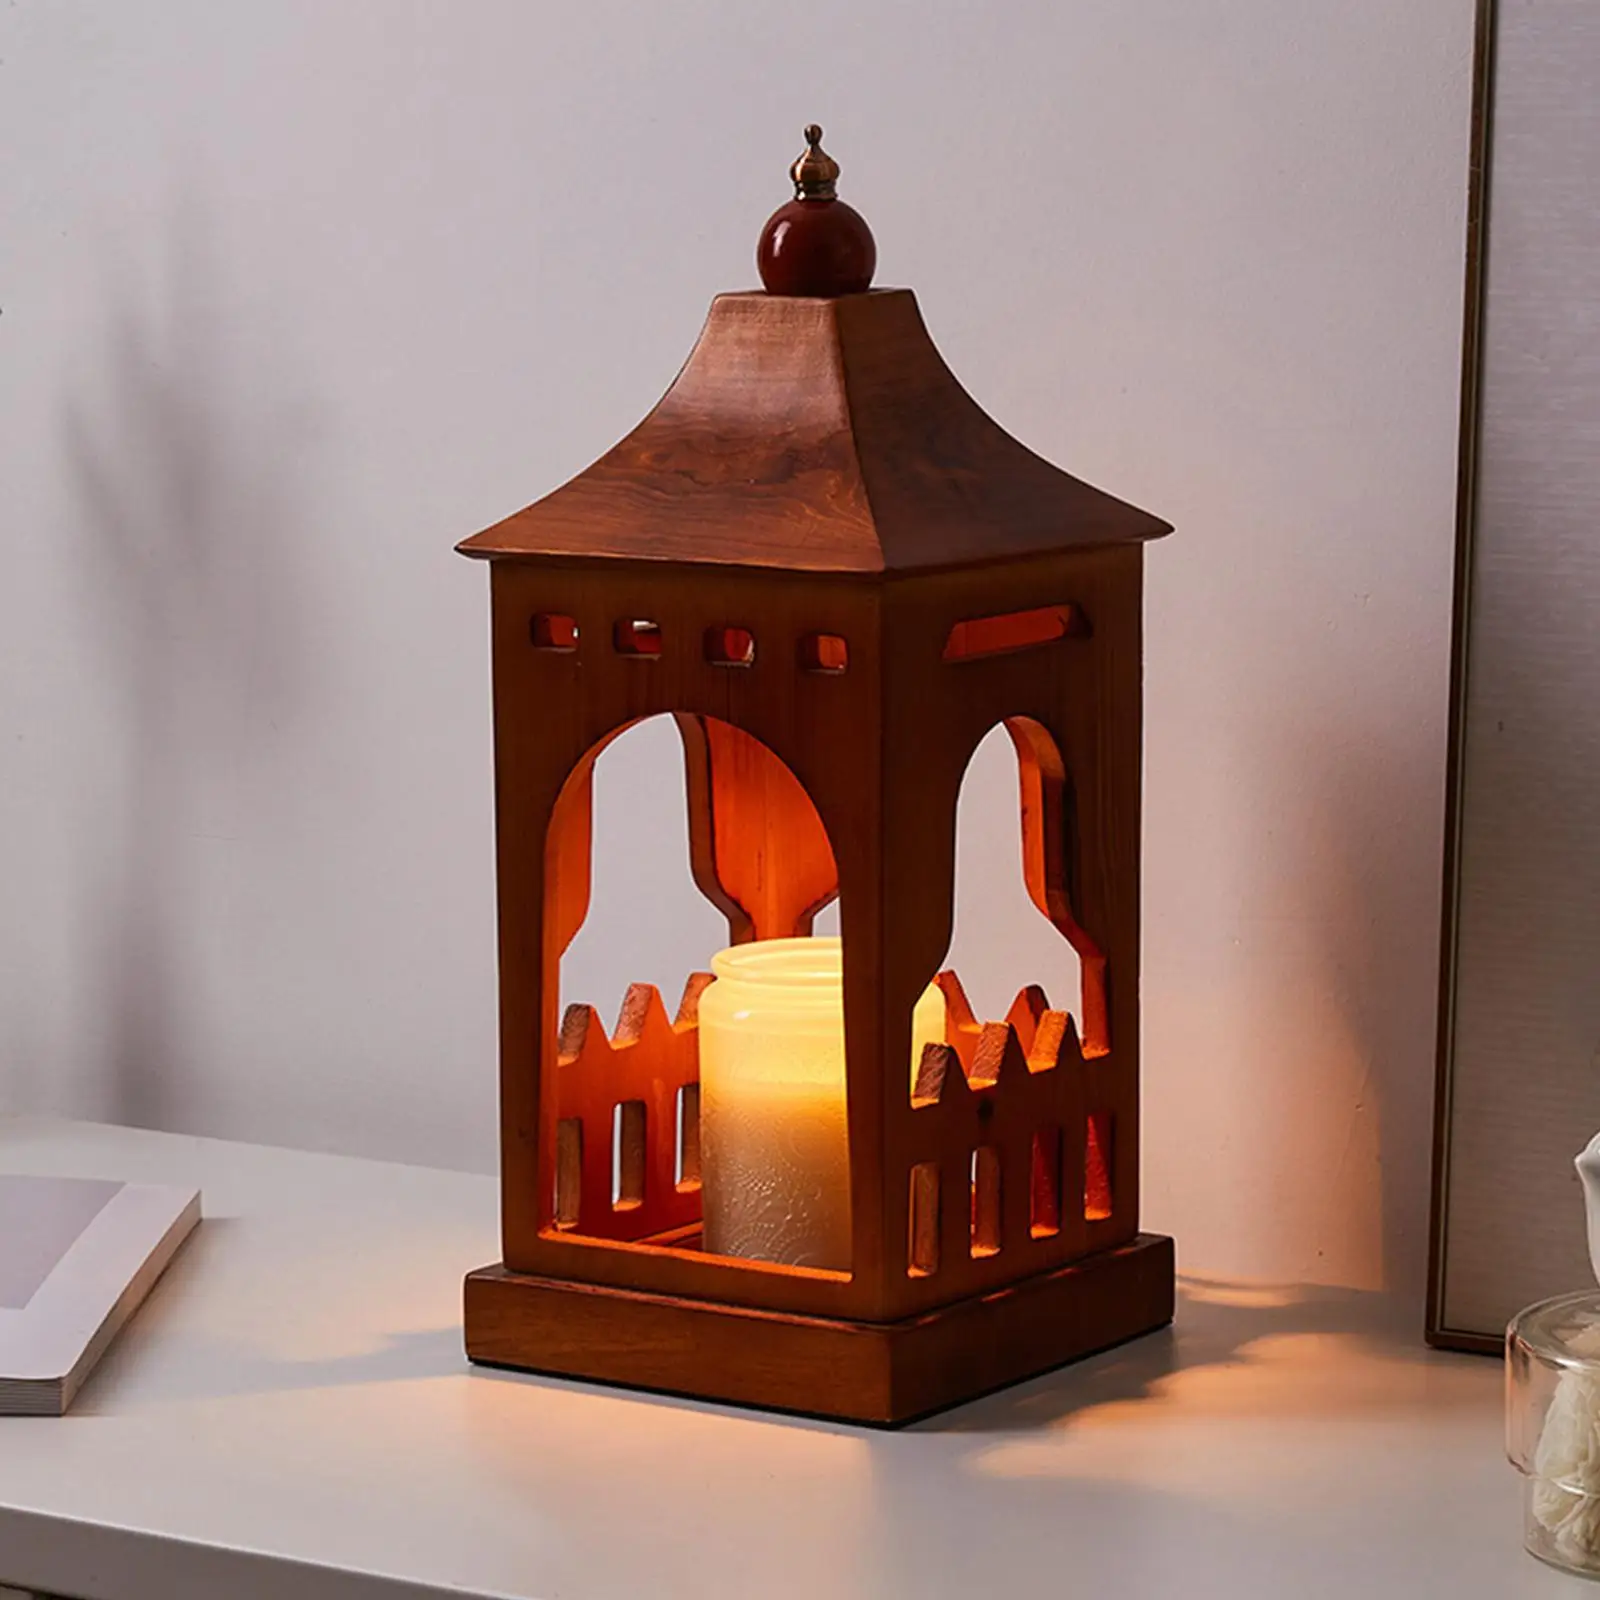 Wooden Candle Warmer Decoration Fragrance Wax Melting Light for Table Bedroom Home